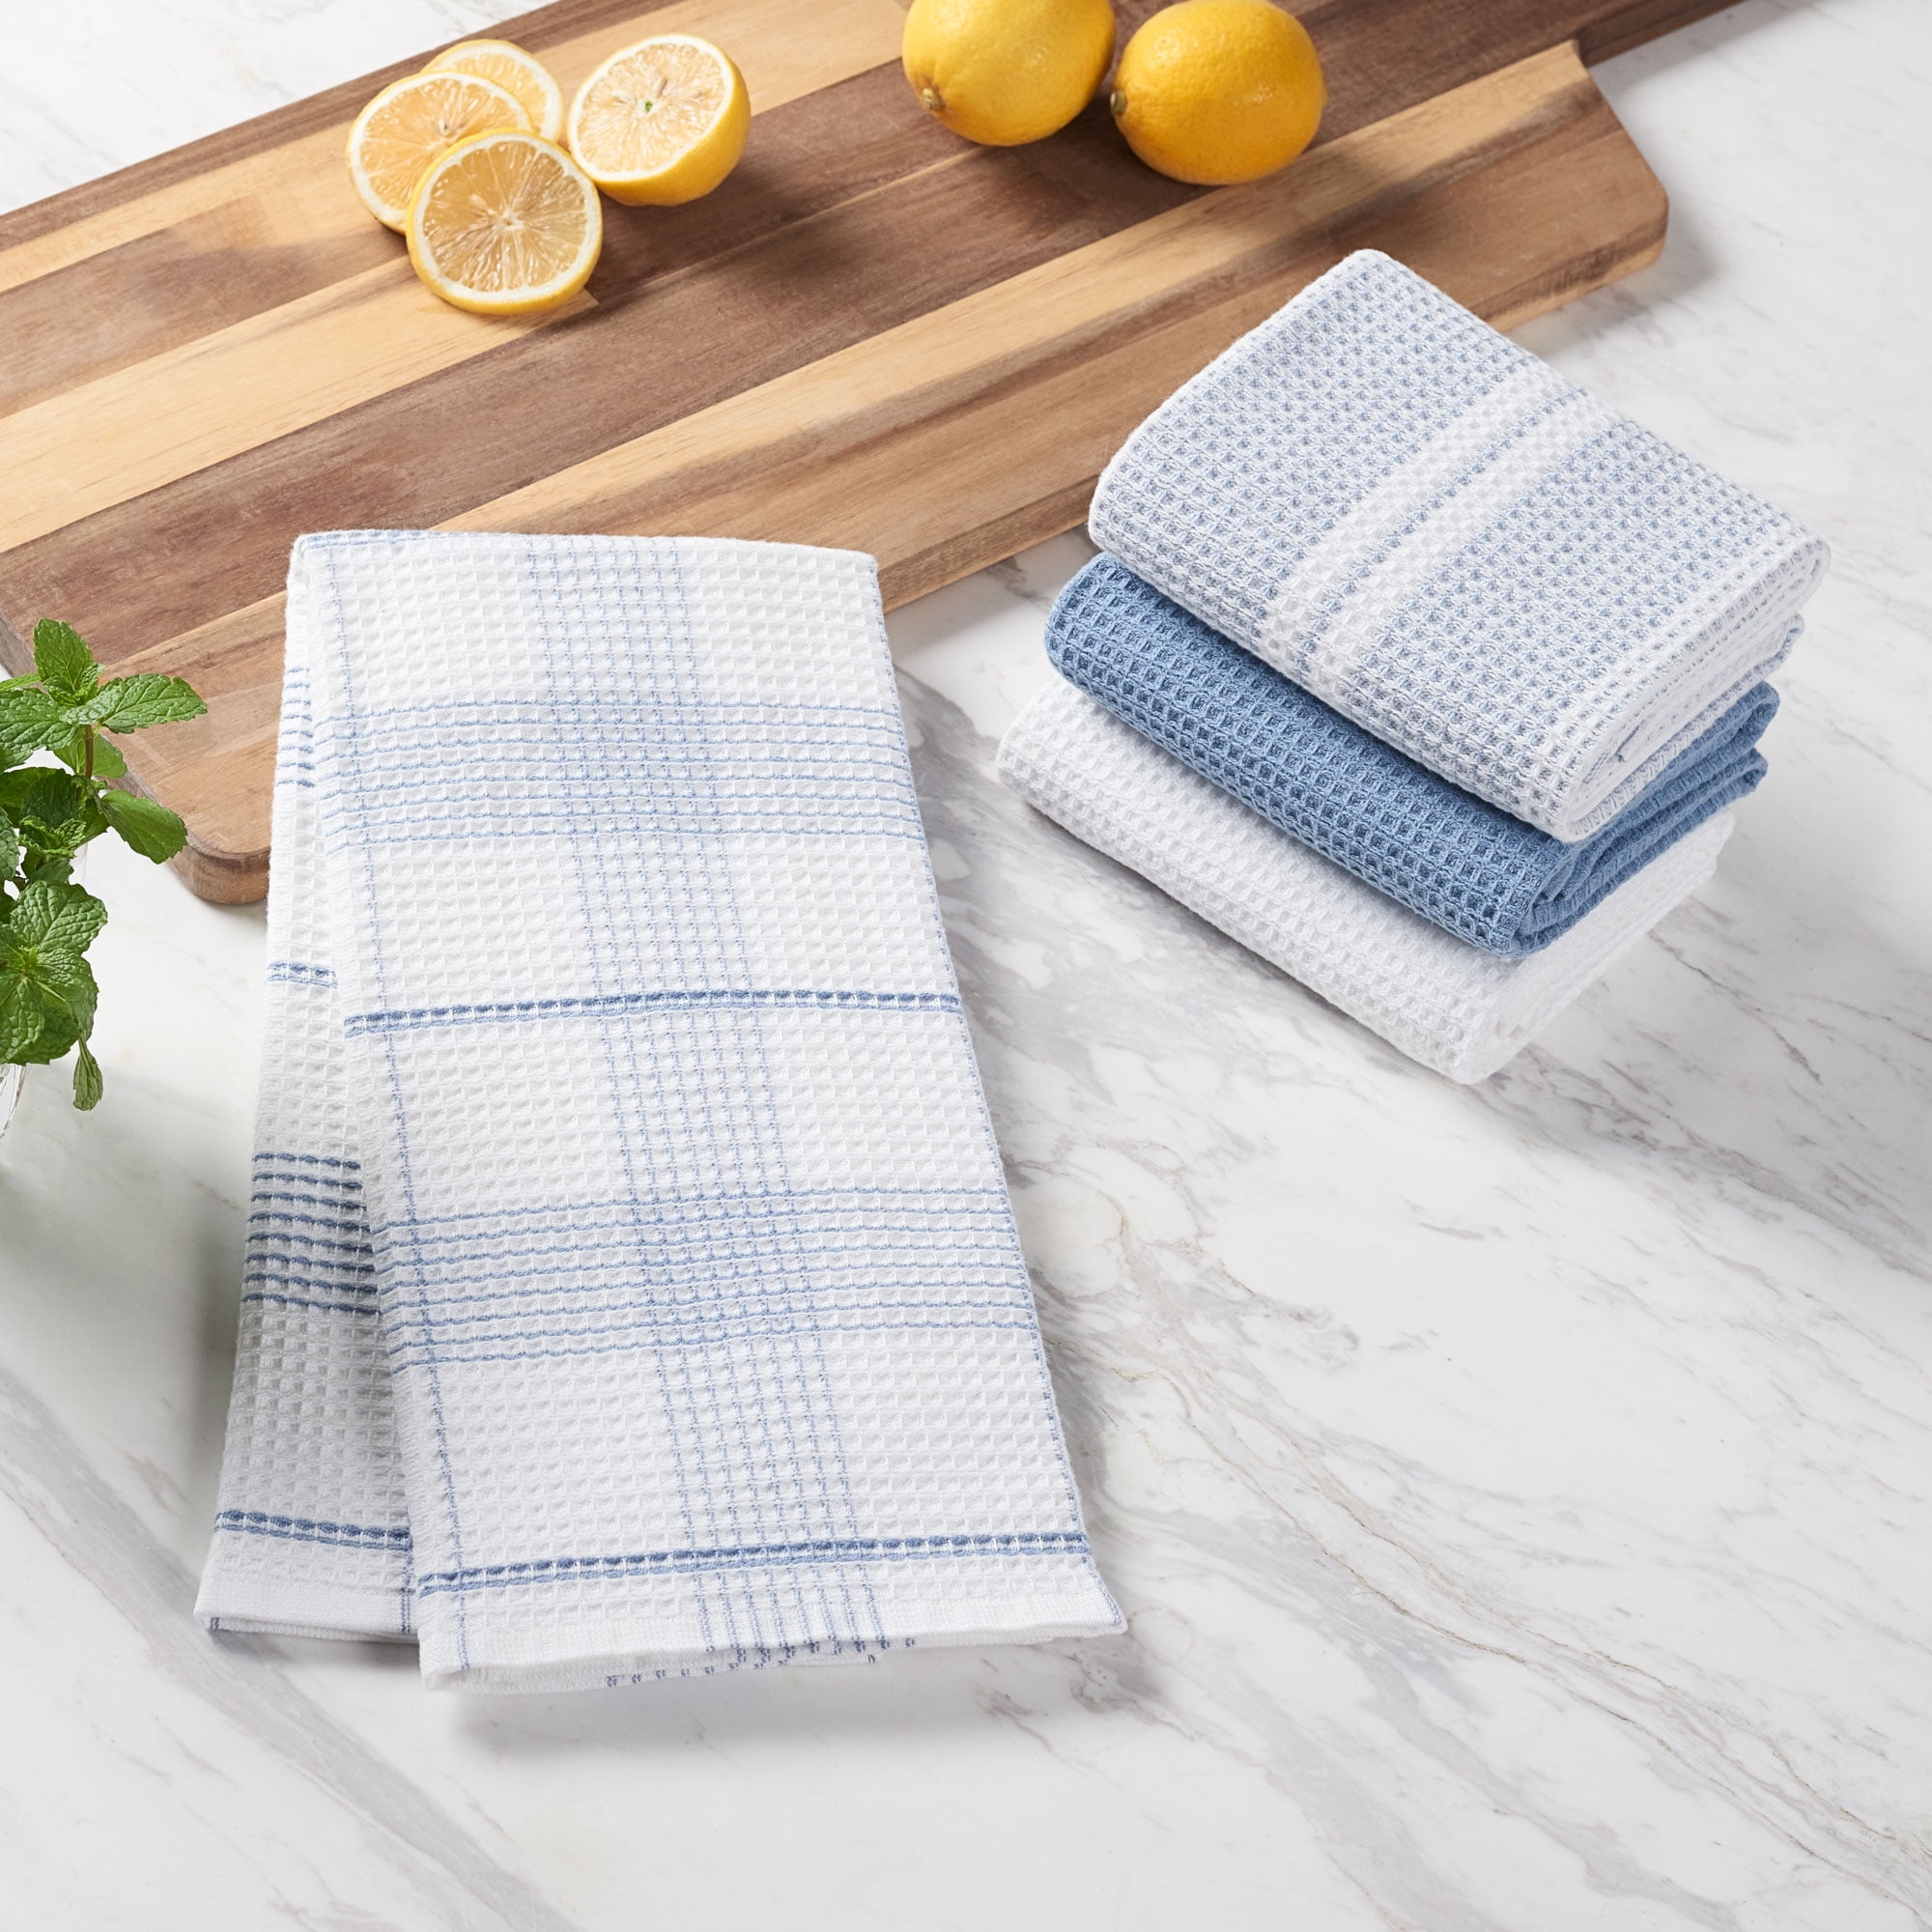 All-Clad Absorbent Cotton Oversized Kitchen Towels Set of 4 Blue & White